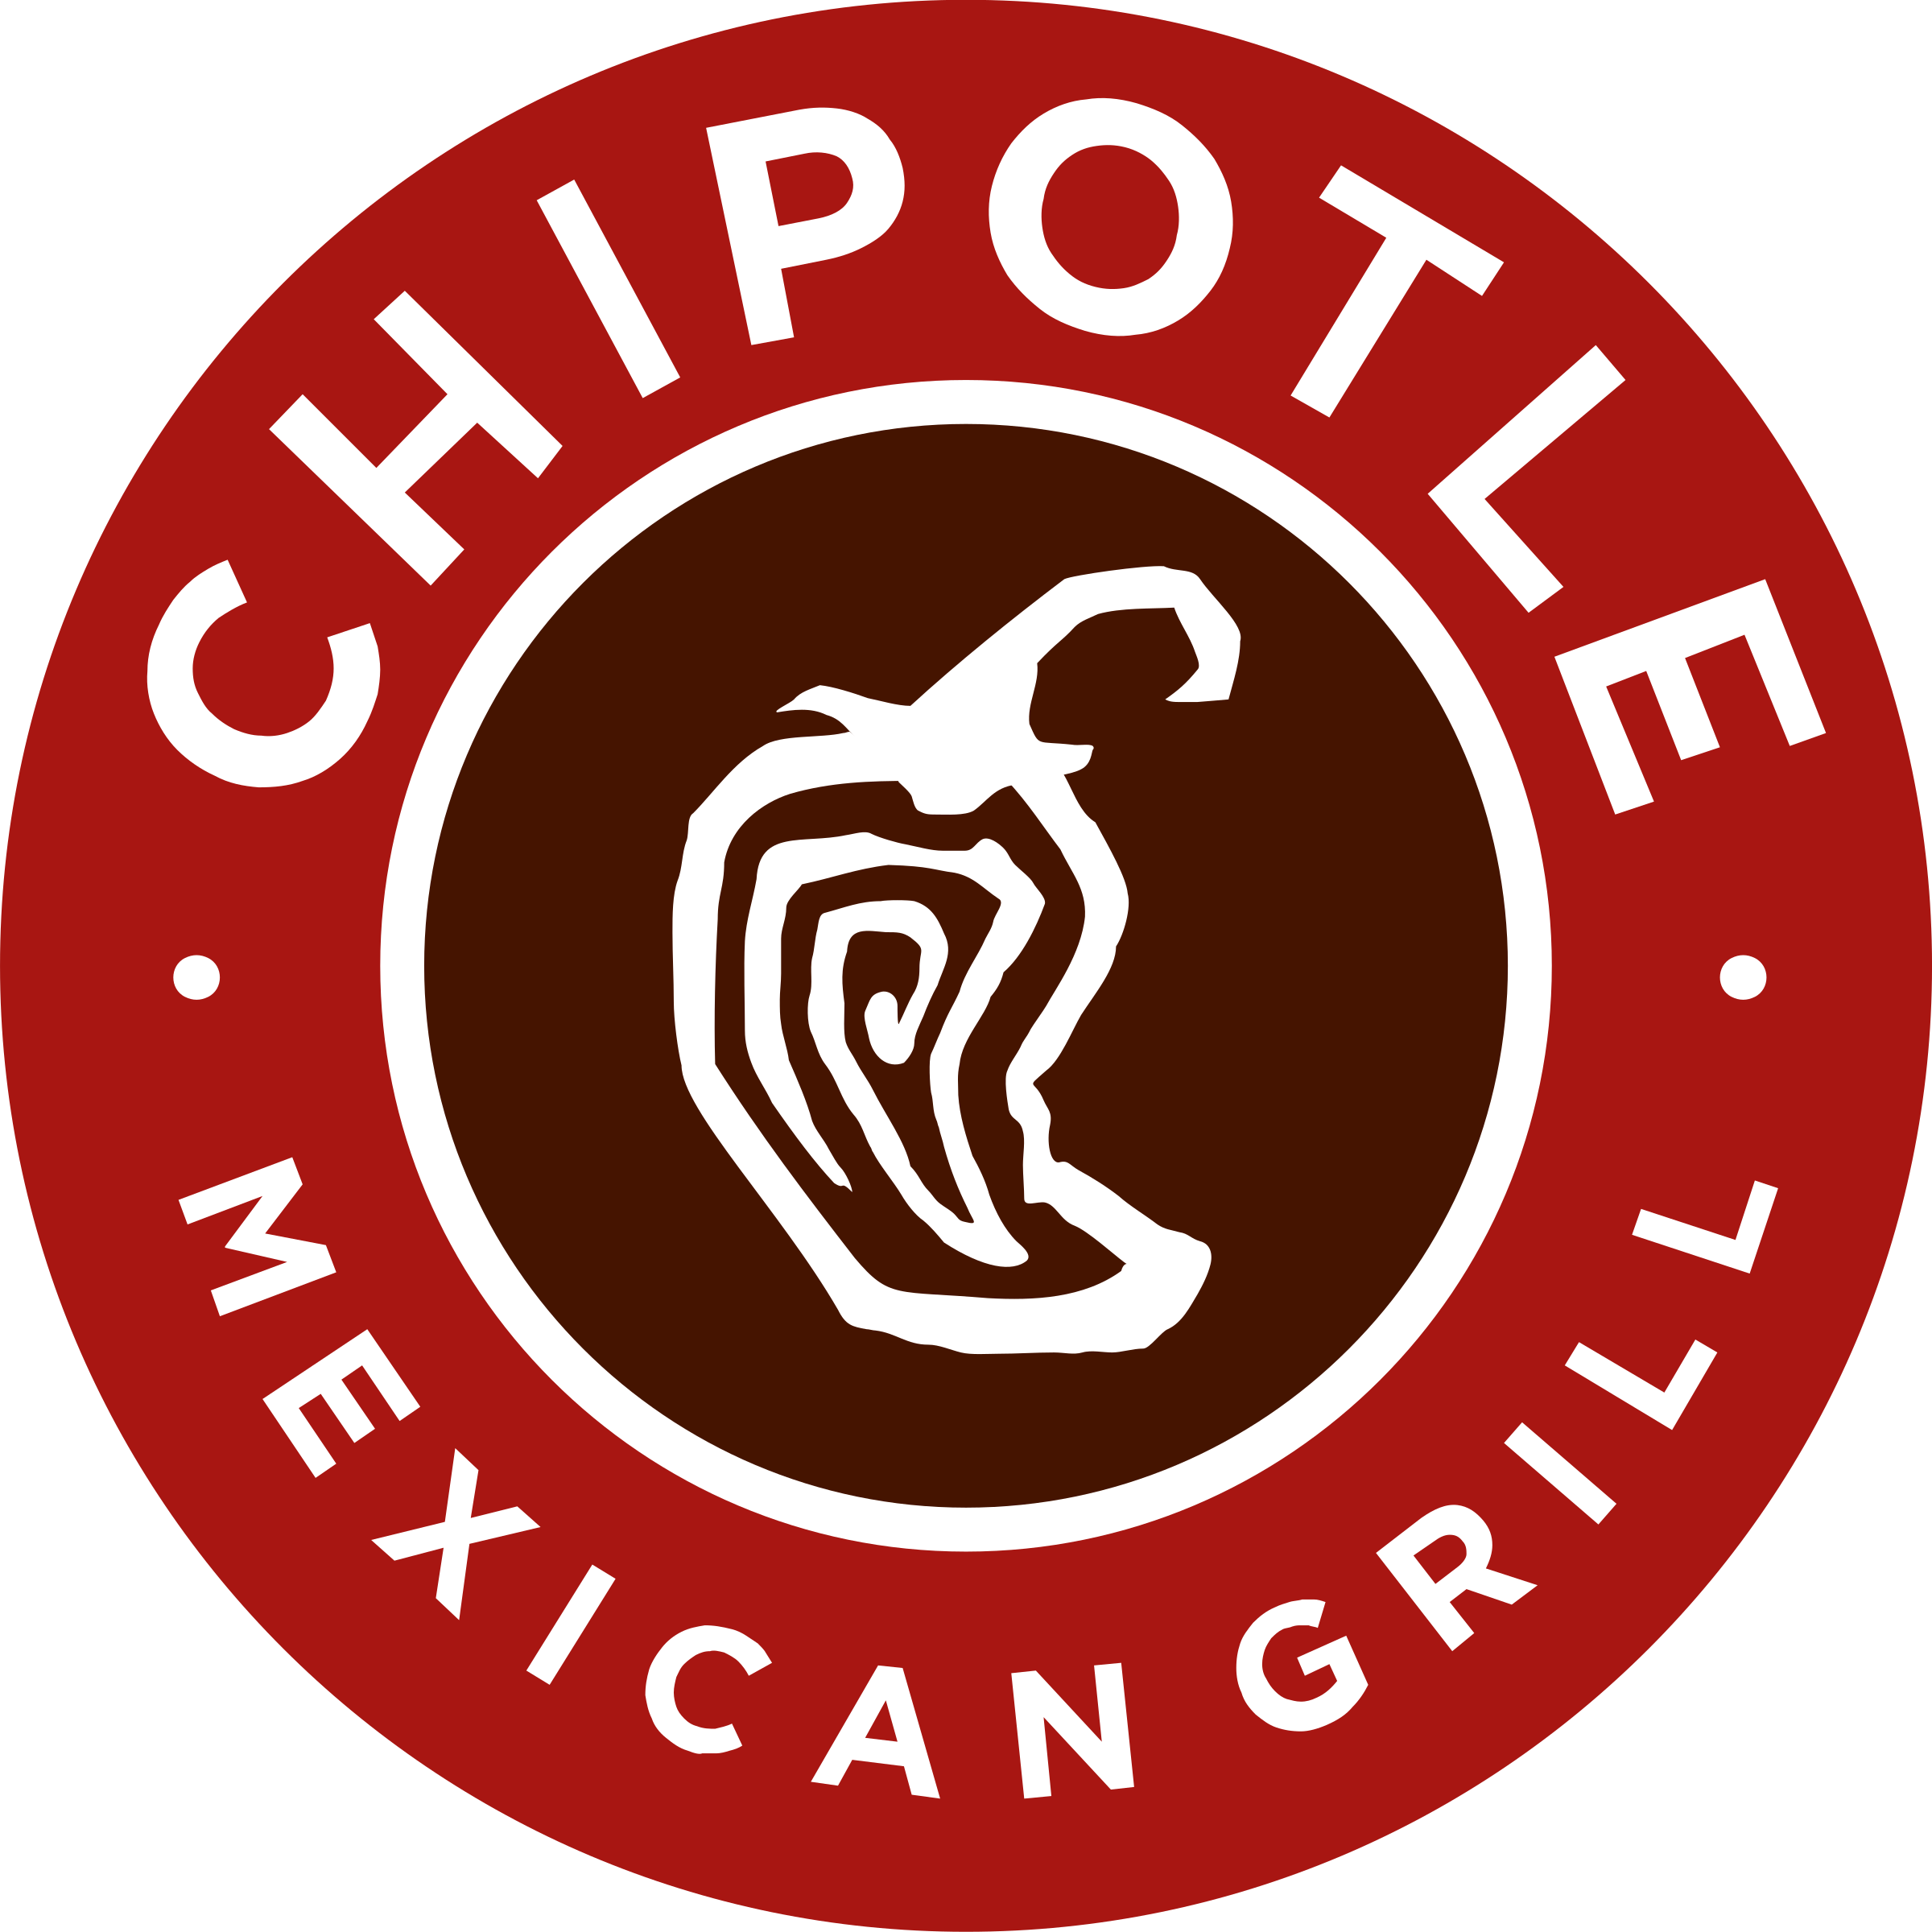 chipotle-mexican-grill-logo-png-transparent.png